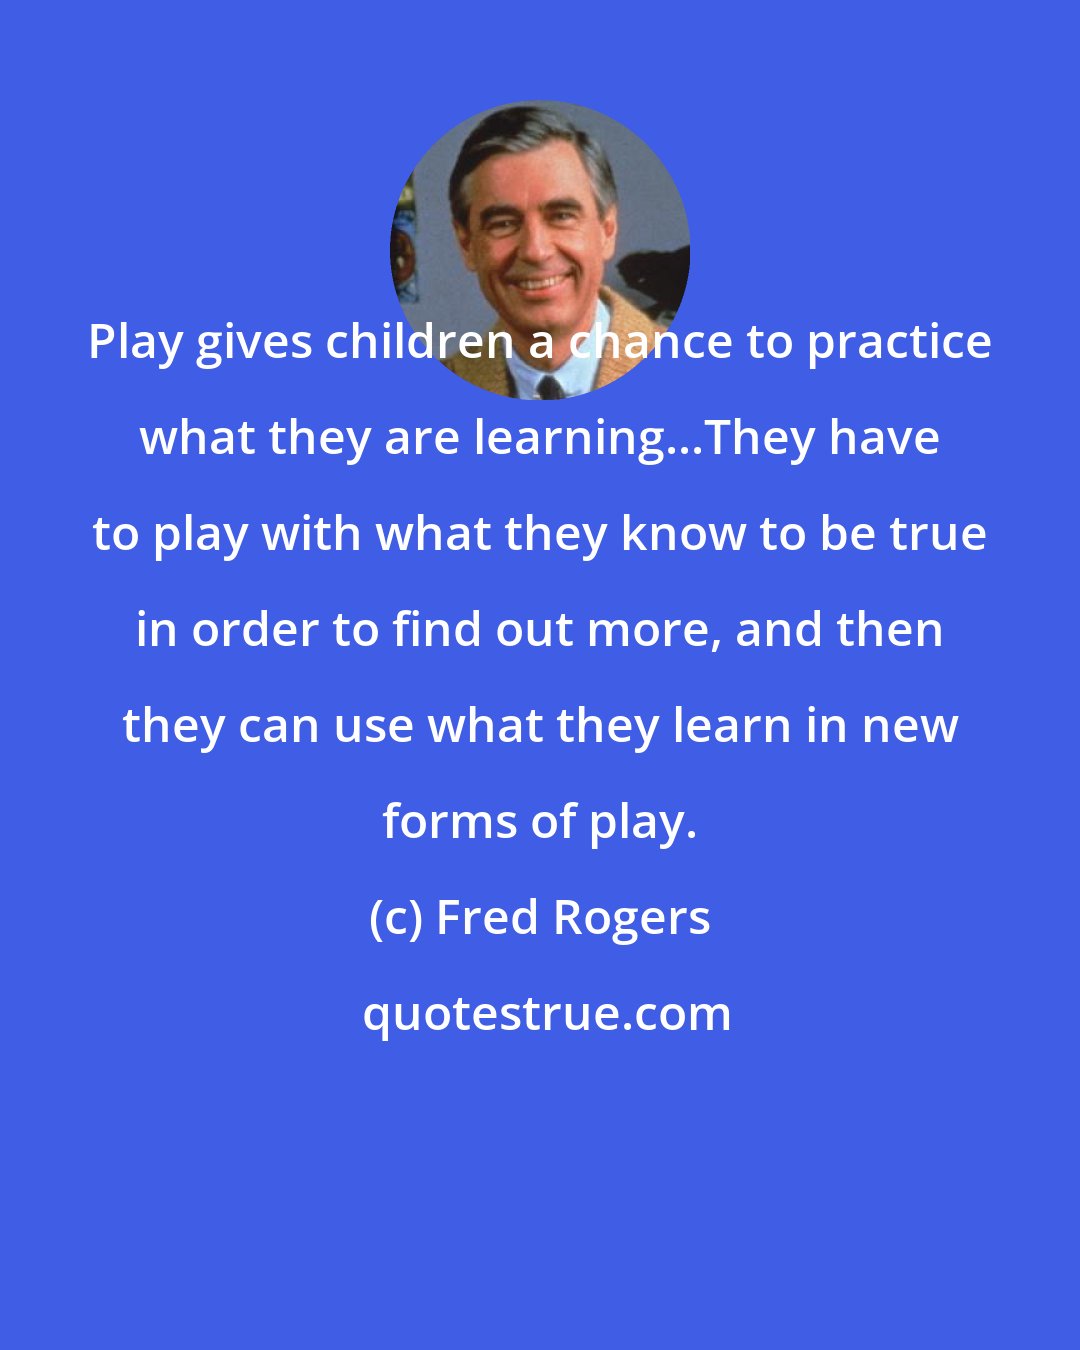 Fred Rogers: Play gives children a chance to practice what they are learning...They have to play with what they know to be true in order to find out more, and then they can use what they learn in new forms of play.